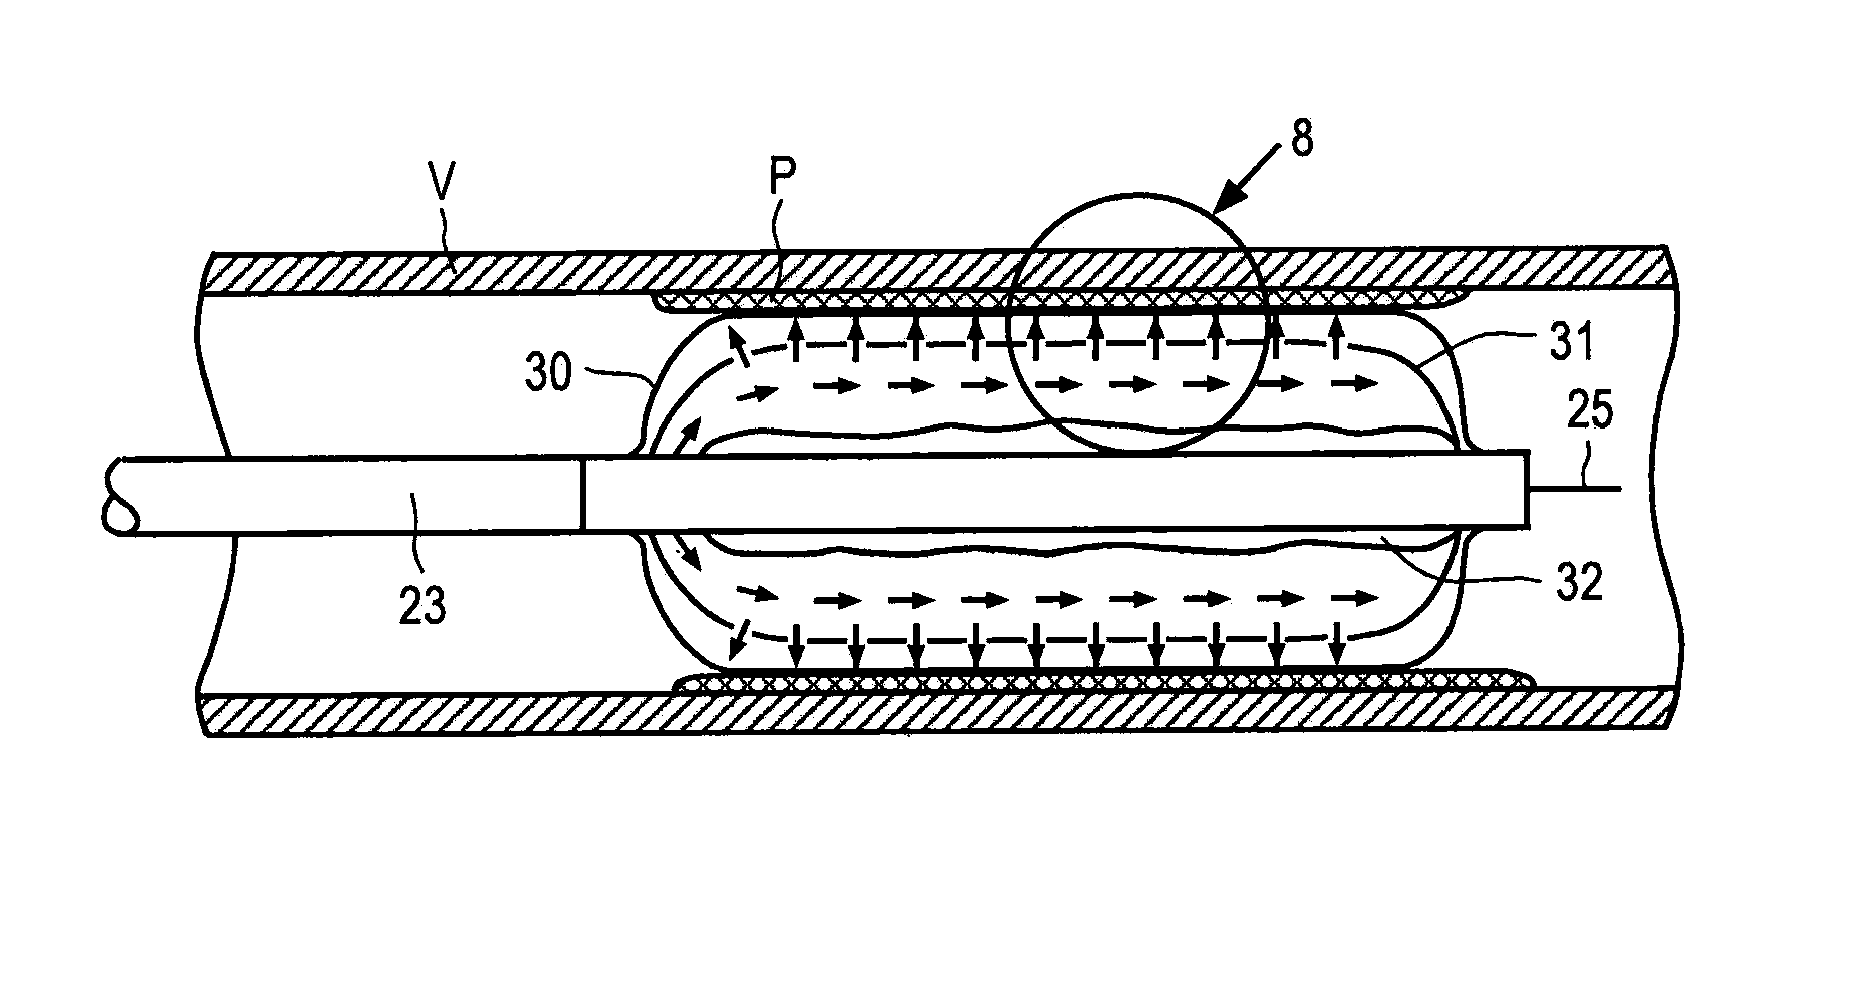 Apparatus and method for delivering intraluminal therapy